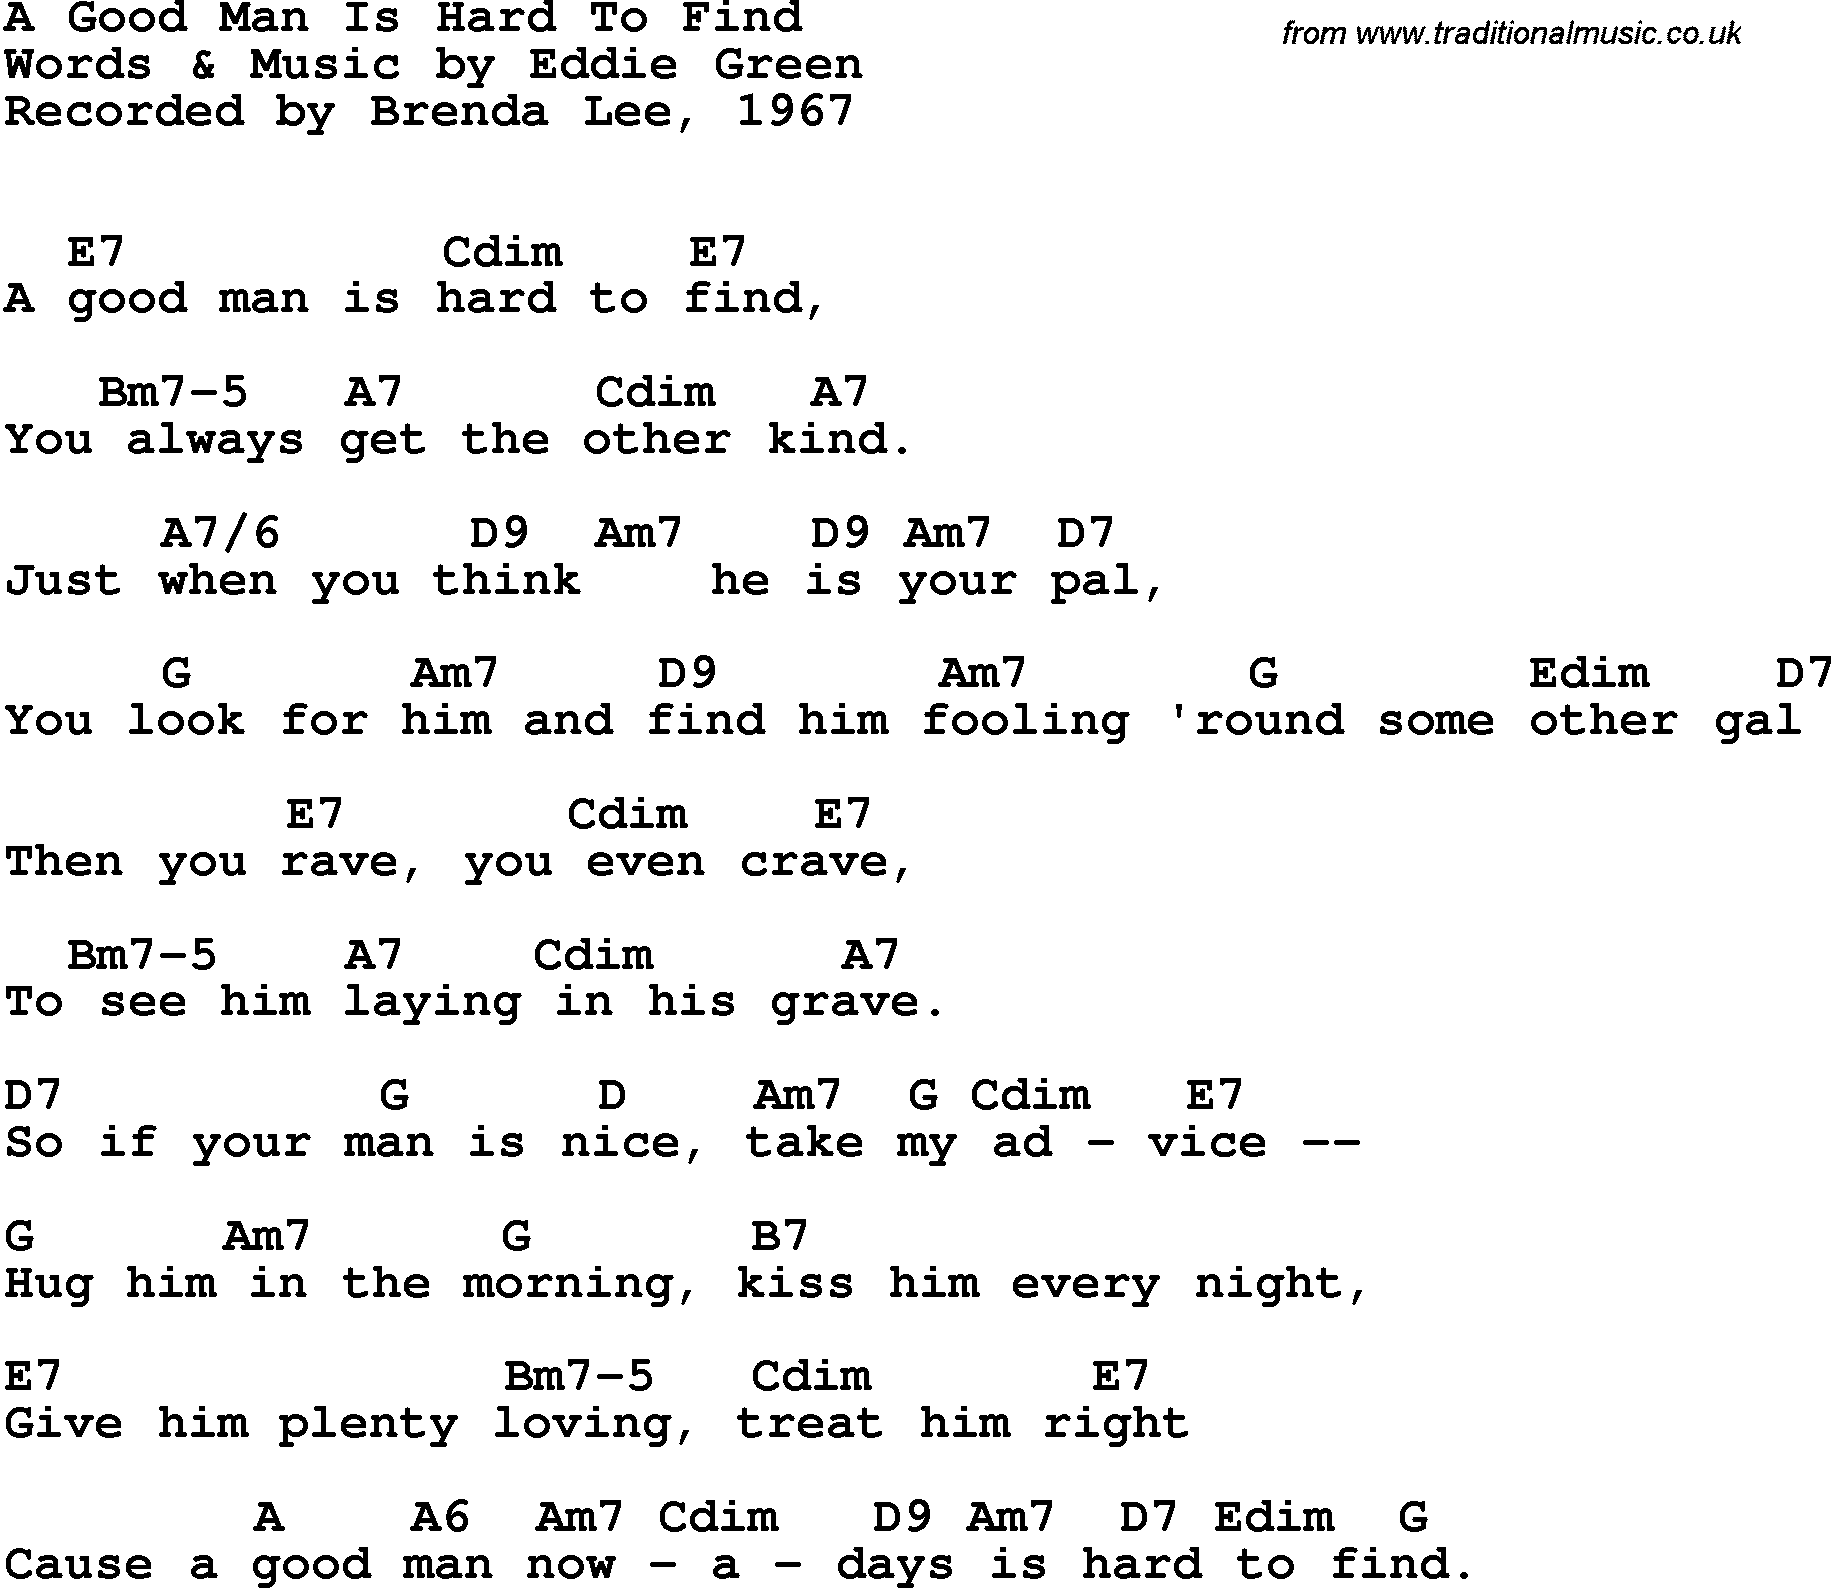 Song Lyrics with guitar chords for A Good Man Is Hard To Find - Brenda Lee, 1967